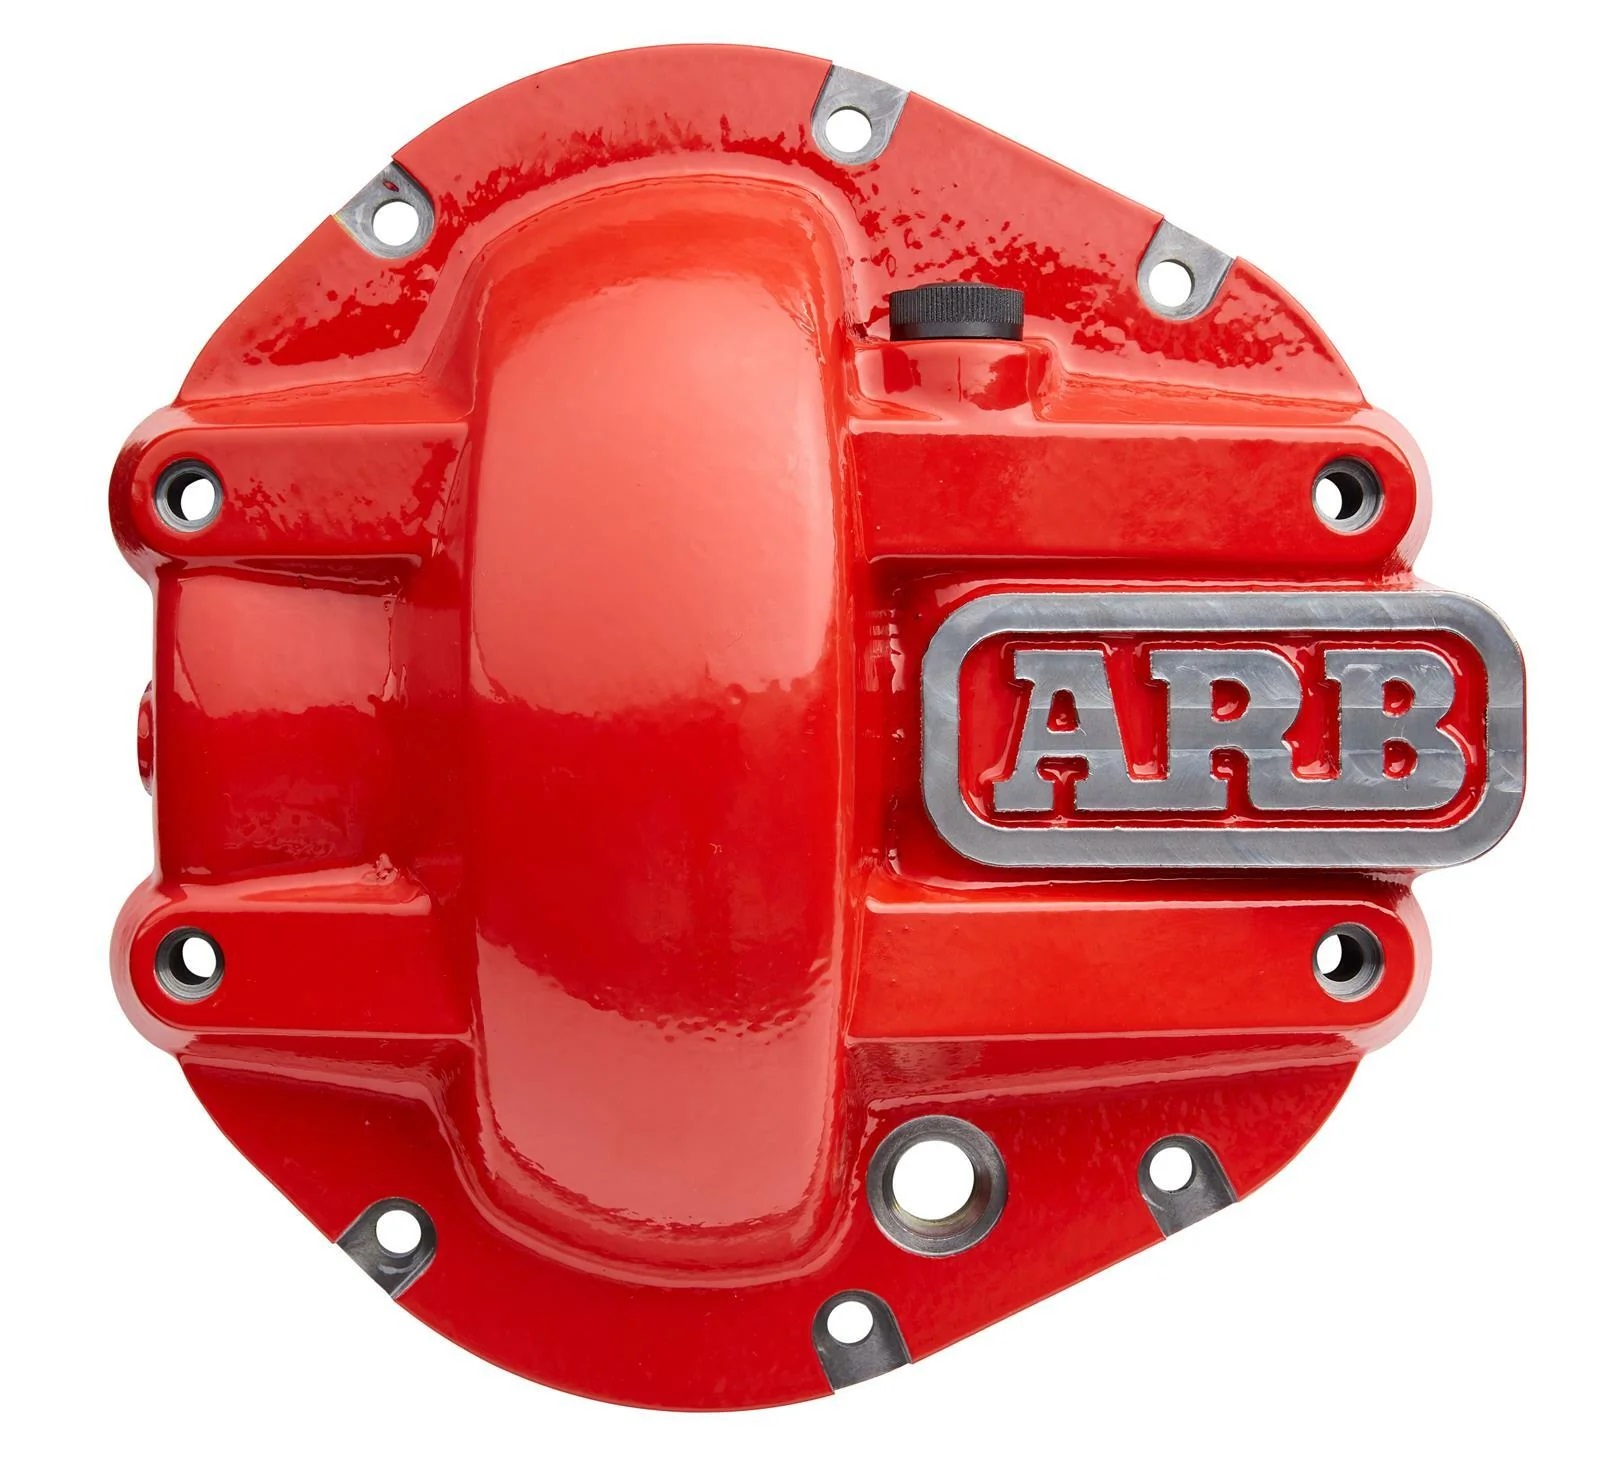 Ford Bronco ARB Differential Cover, 12-bolt, Nodular Iron, Red Powdercoated, Dana M220, Each For 2021-2023 Ford Bronco 750012 ab-fb-arb-750012-t14-arb-differential-cover-12-bolt-nodular-iron-red-powdercoated-dana-m220-ea